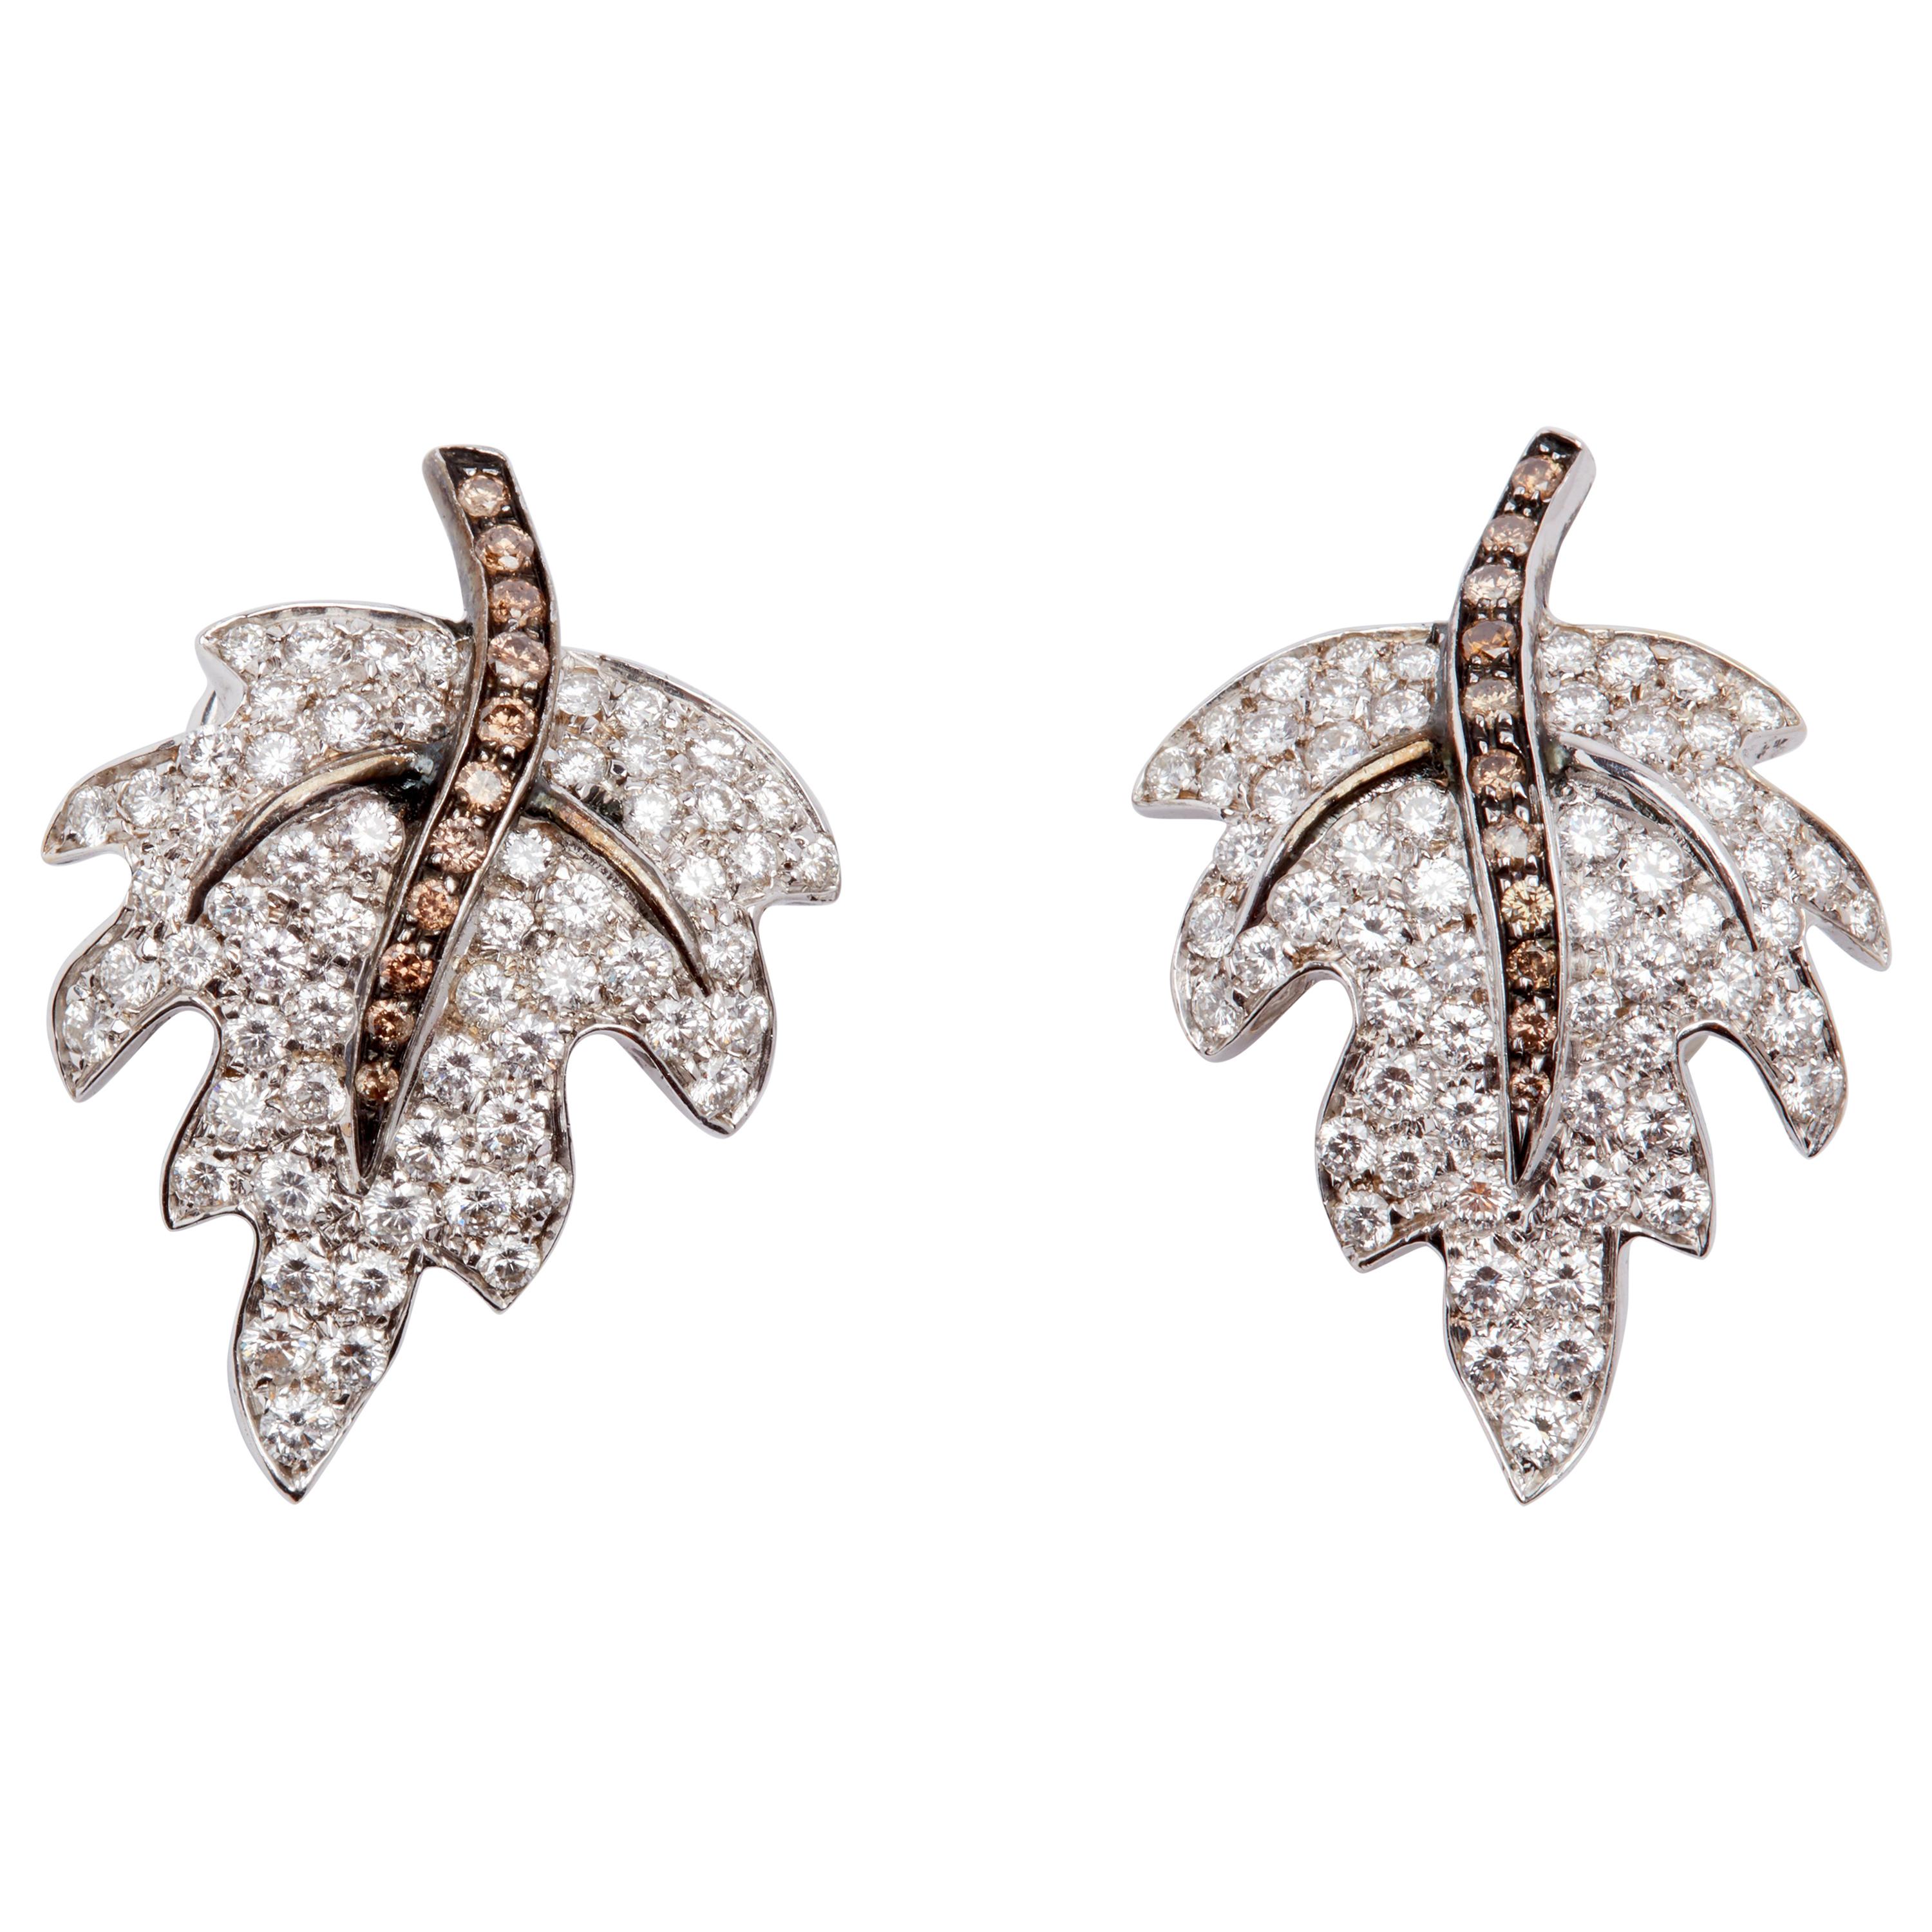 18 Karat White Gold Leaf Earring with White and Brown Diamonds